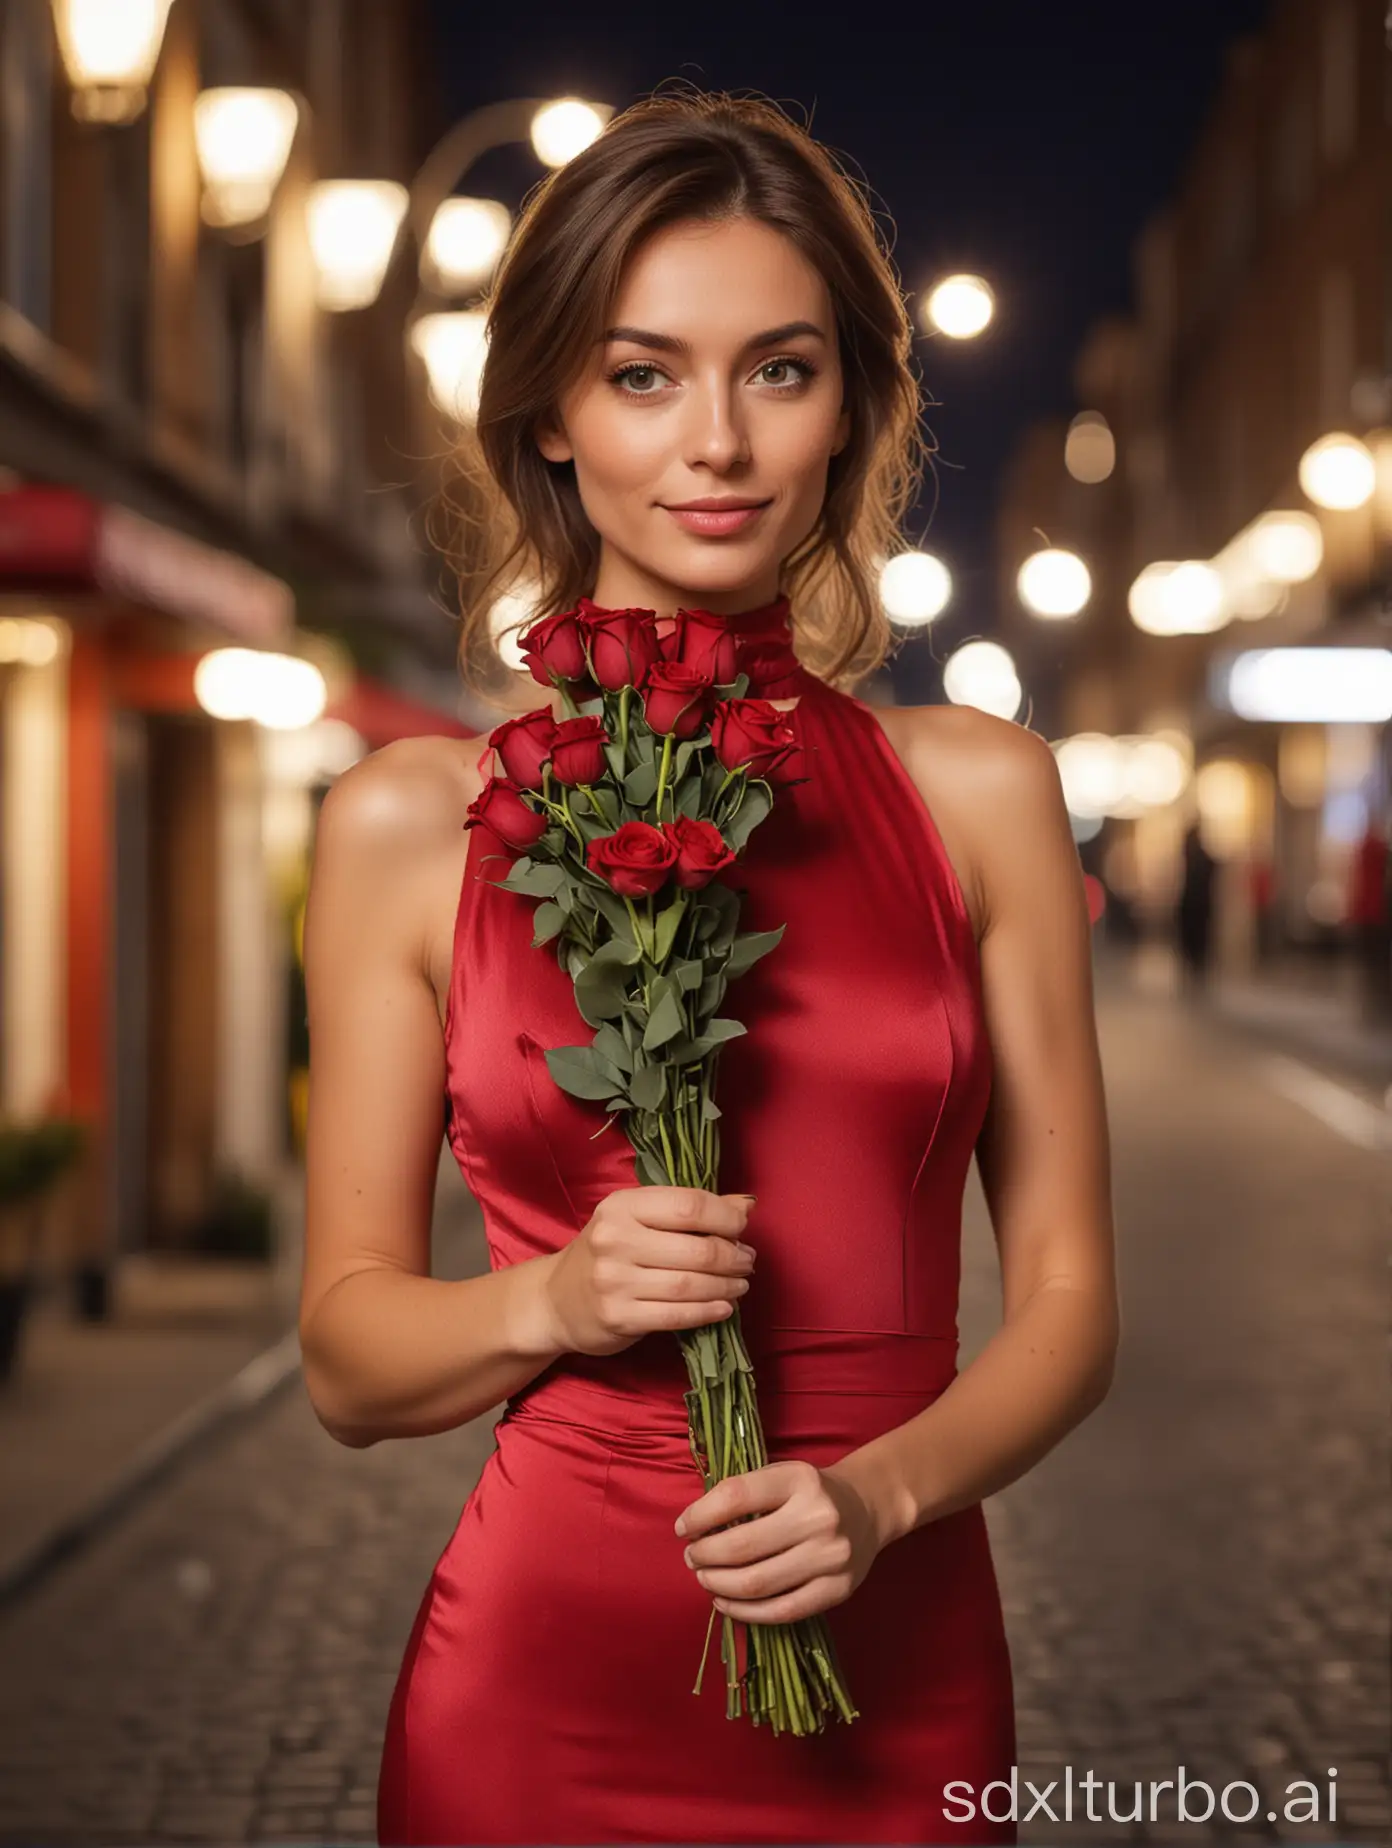 Elegant-Woman-in-Red-Silk-Evening-Gown-Holding-Bouquet-at-Night